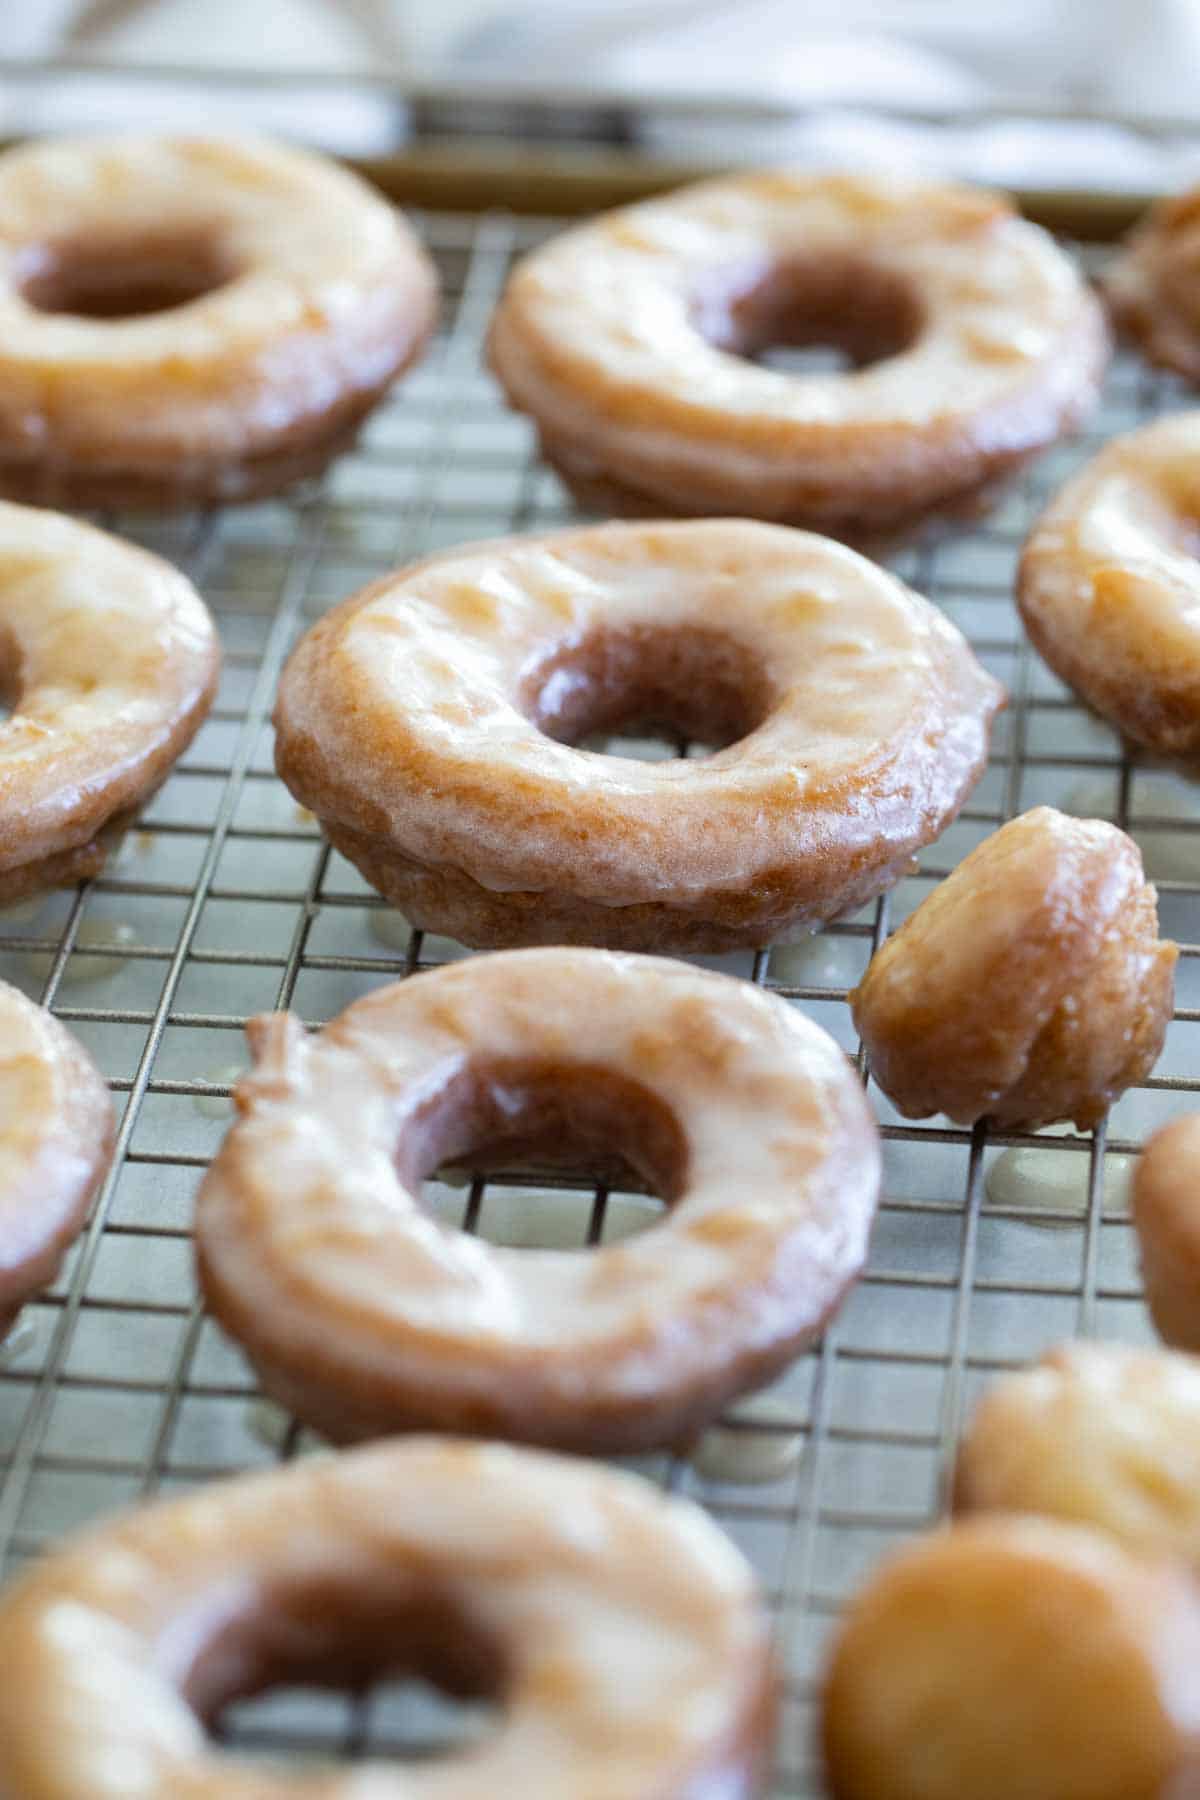 Homemade Cake Donuts with a glaze over a cooling rack.